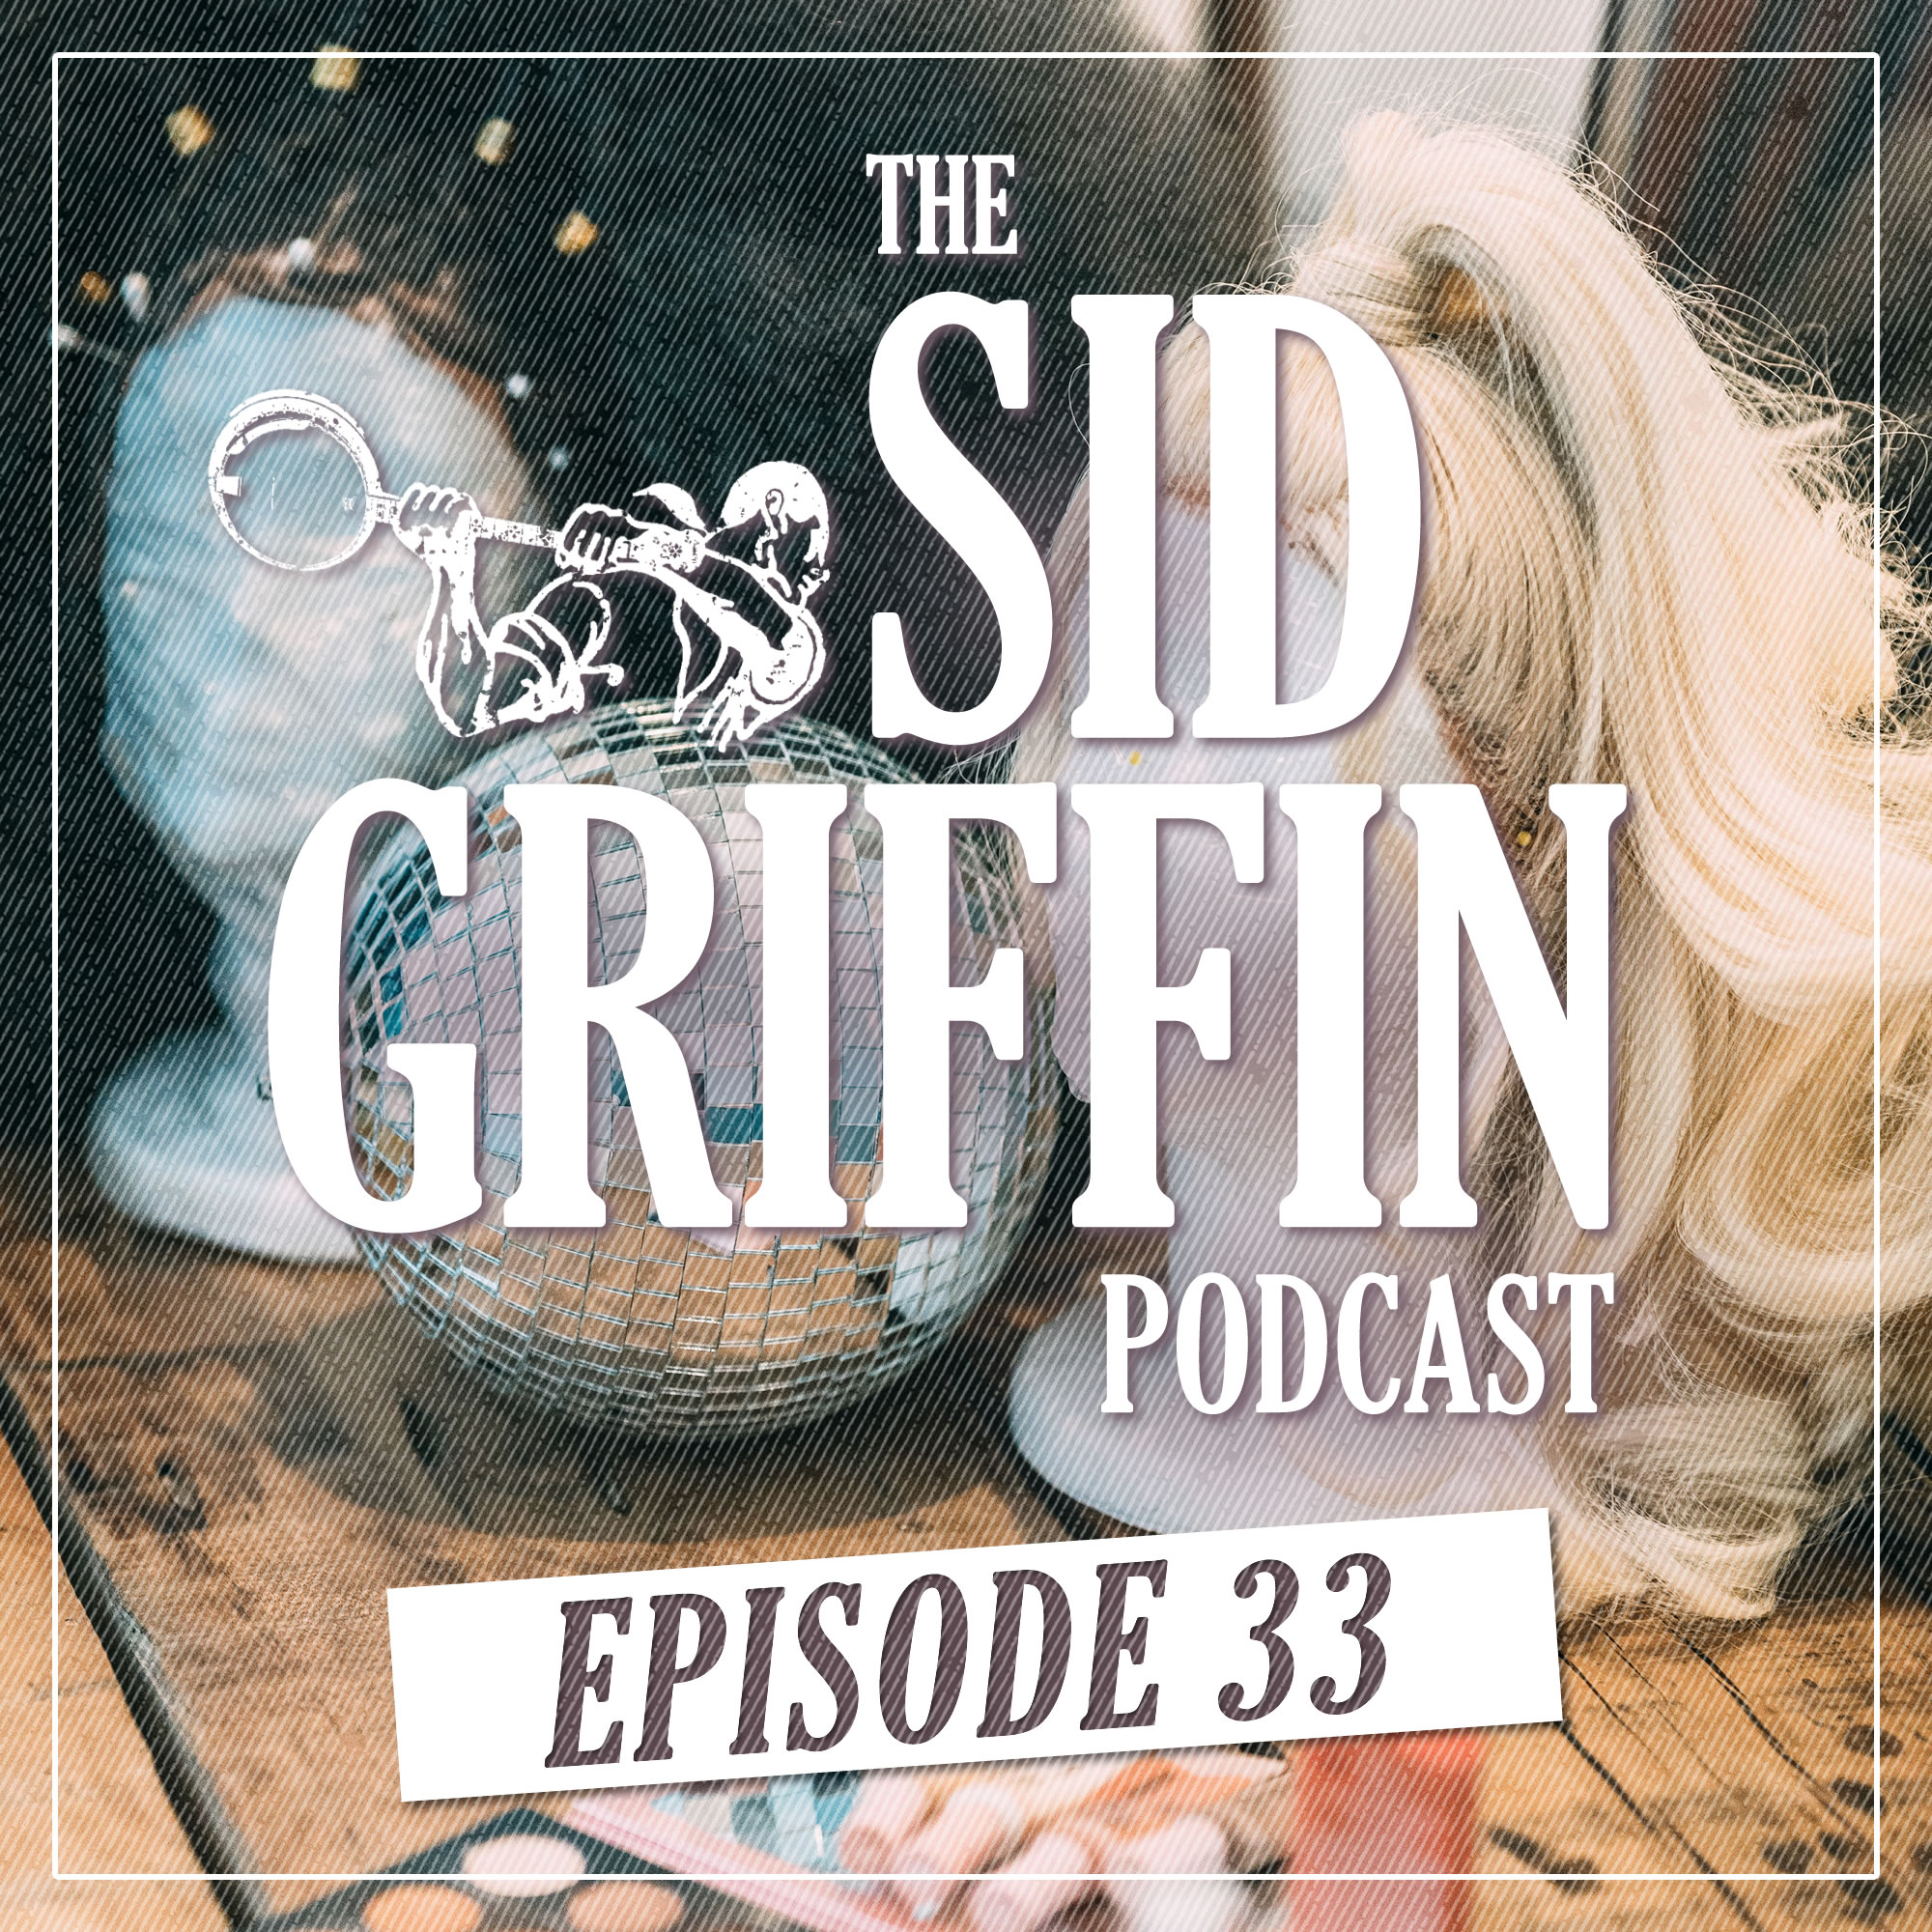 The Sid Griffin Podcast - Call All Coal Porters - Show 33